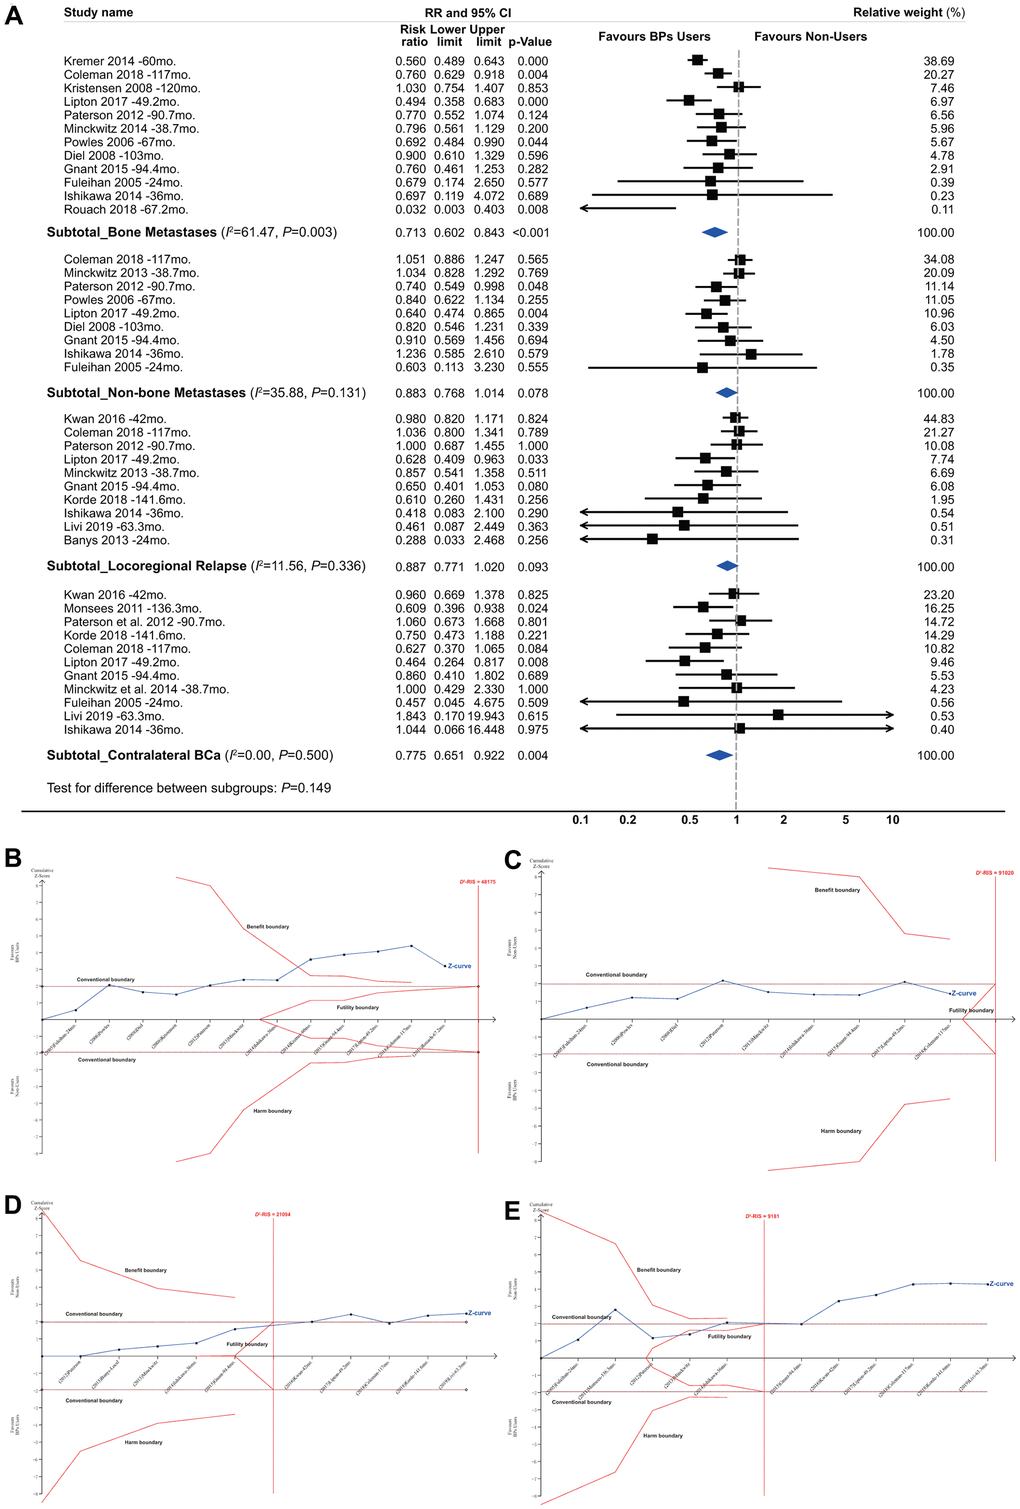 Summarized results of bisphosphonates and breast cancer survival by recurrence site. (A) Conventional subgroup meta-analysis by recurrence site; (B) Trial sequential analysis for subgroups of bone metastases; (C) Non-skeletal distant metastases; (D) Local-regional relapses and (E) contralateral breast cancer.